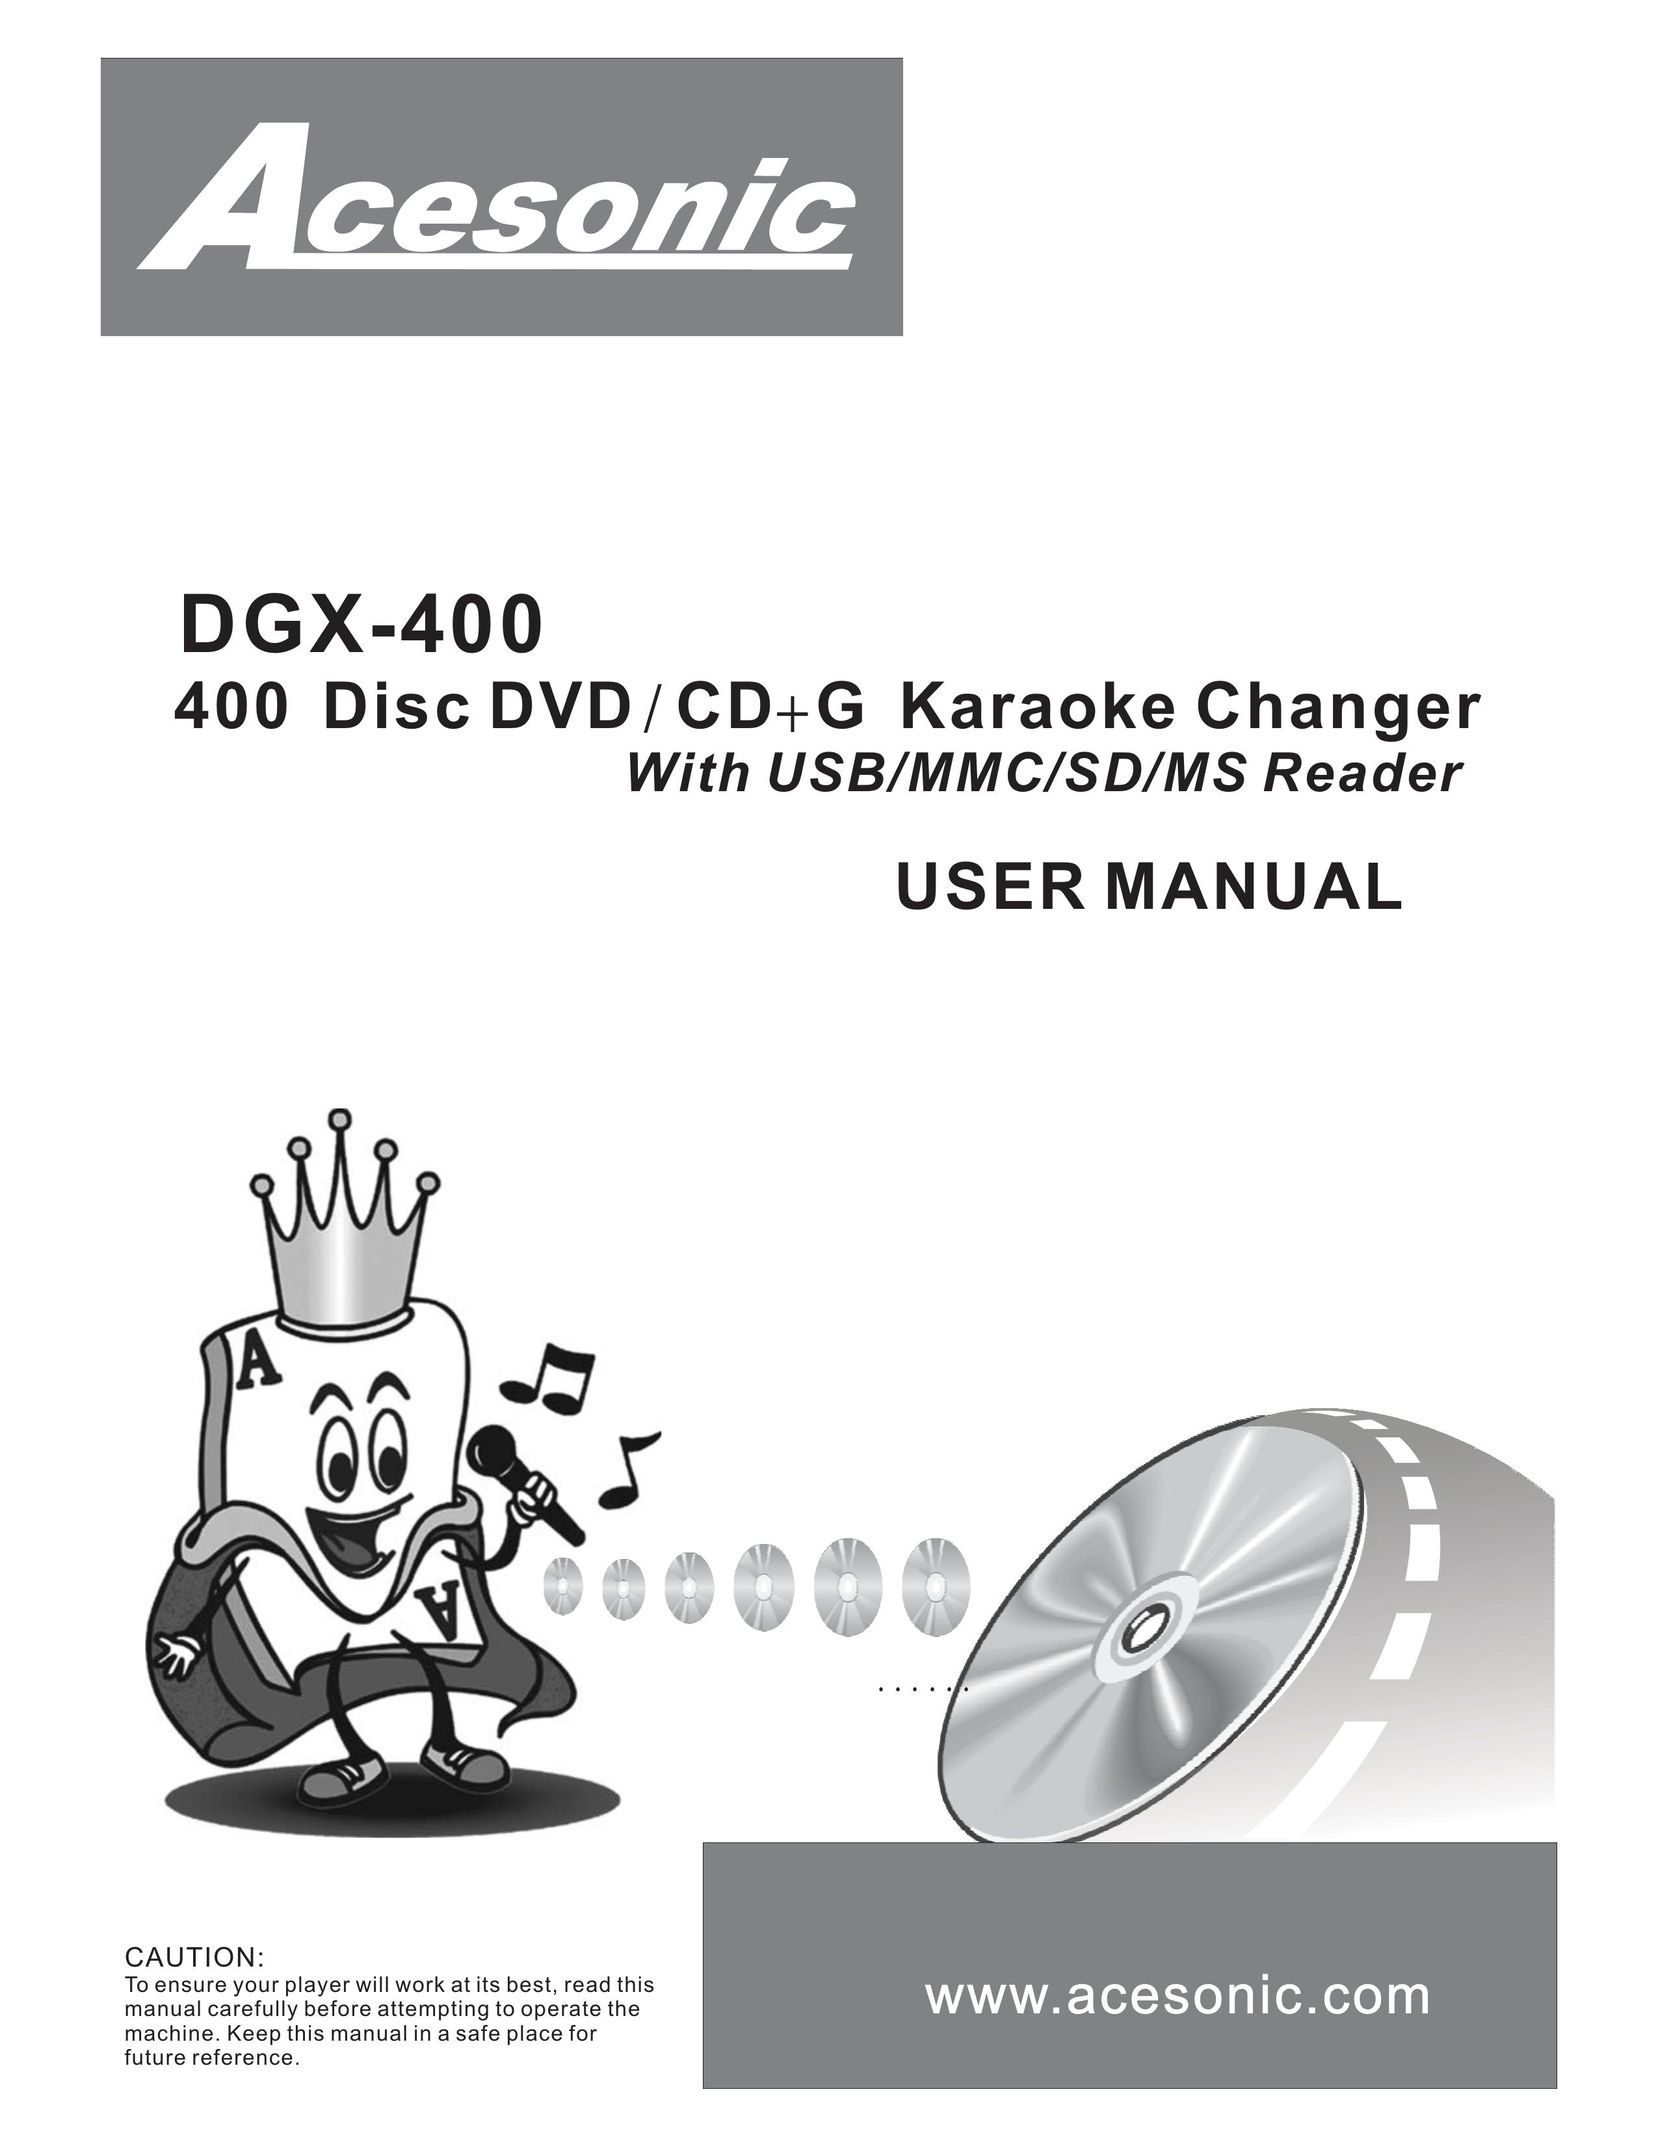 Acesonic DGX-400 Stereo System User Manual